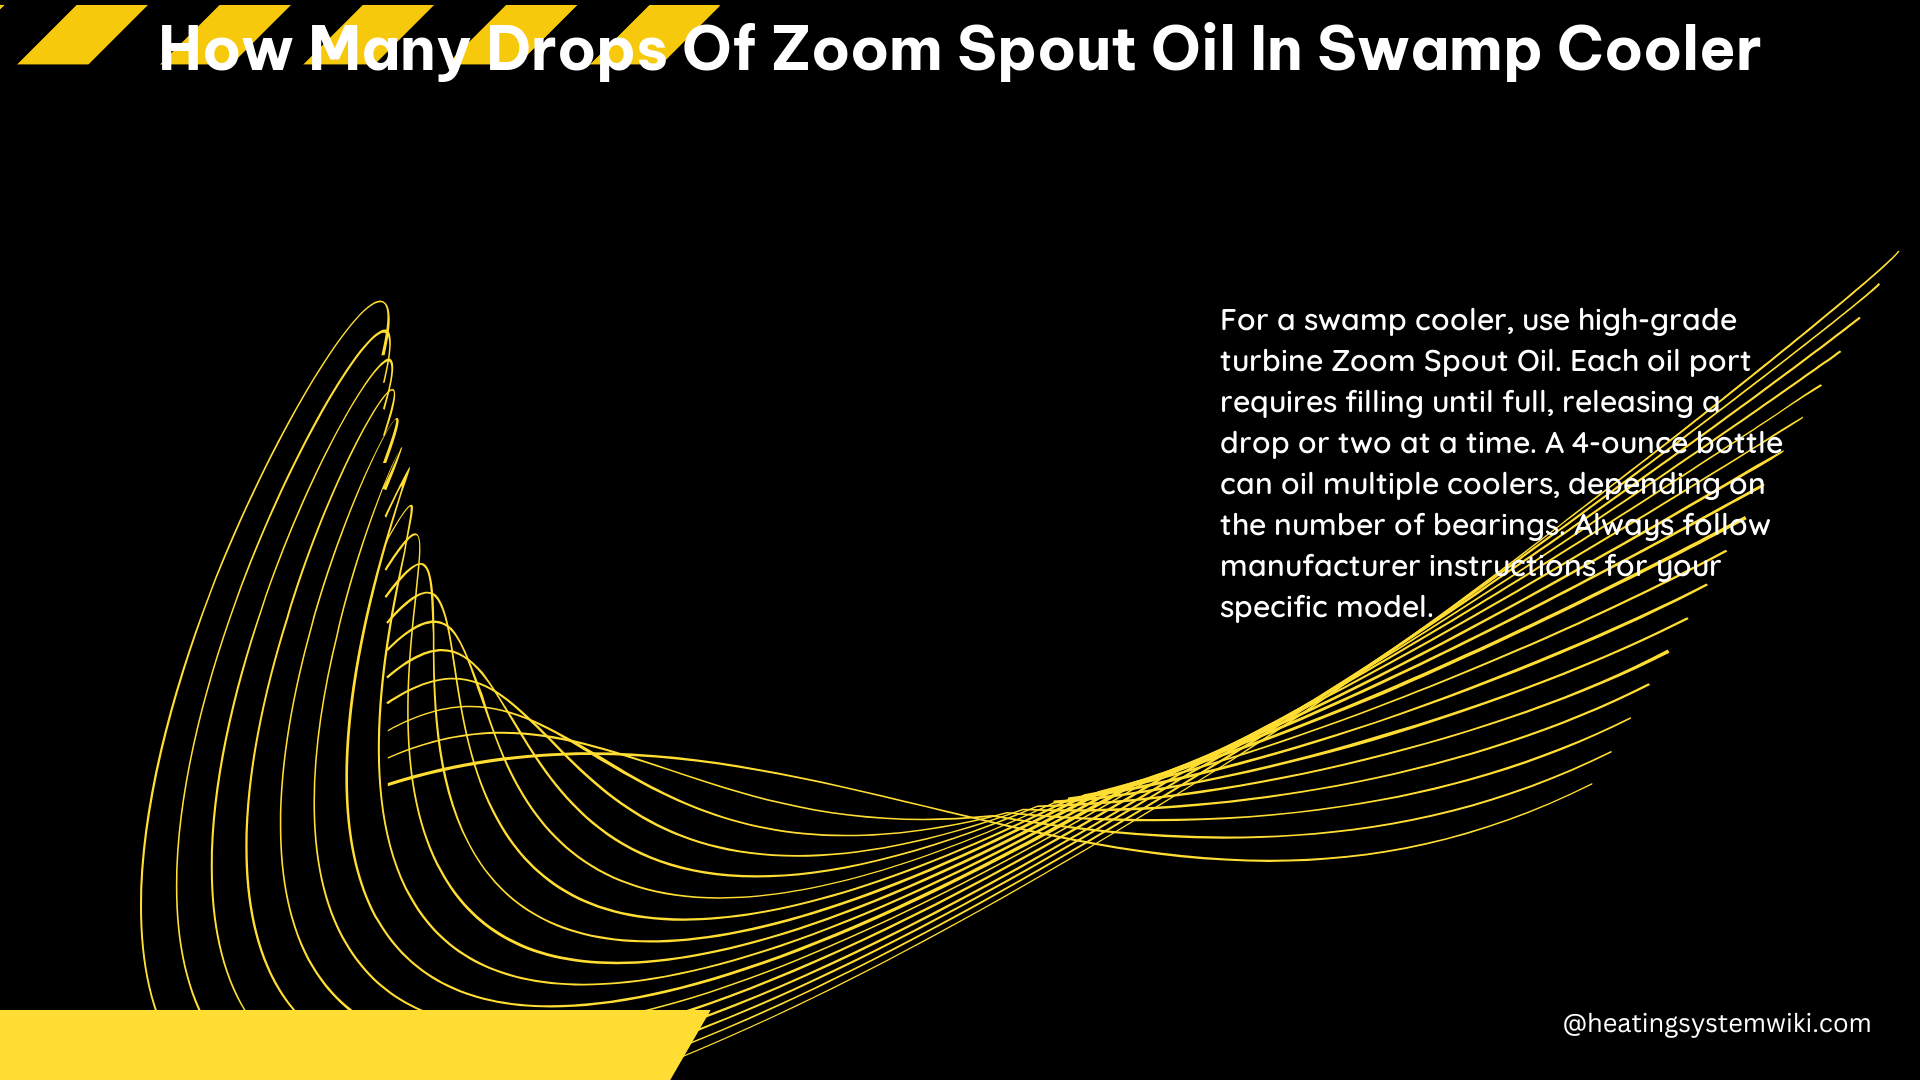 How Many Drops of Zoom Spout Oil in Swamp Cooler